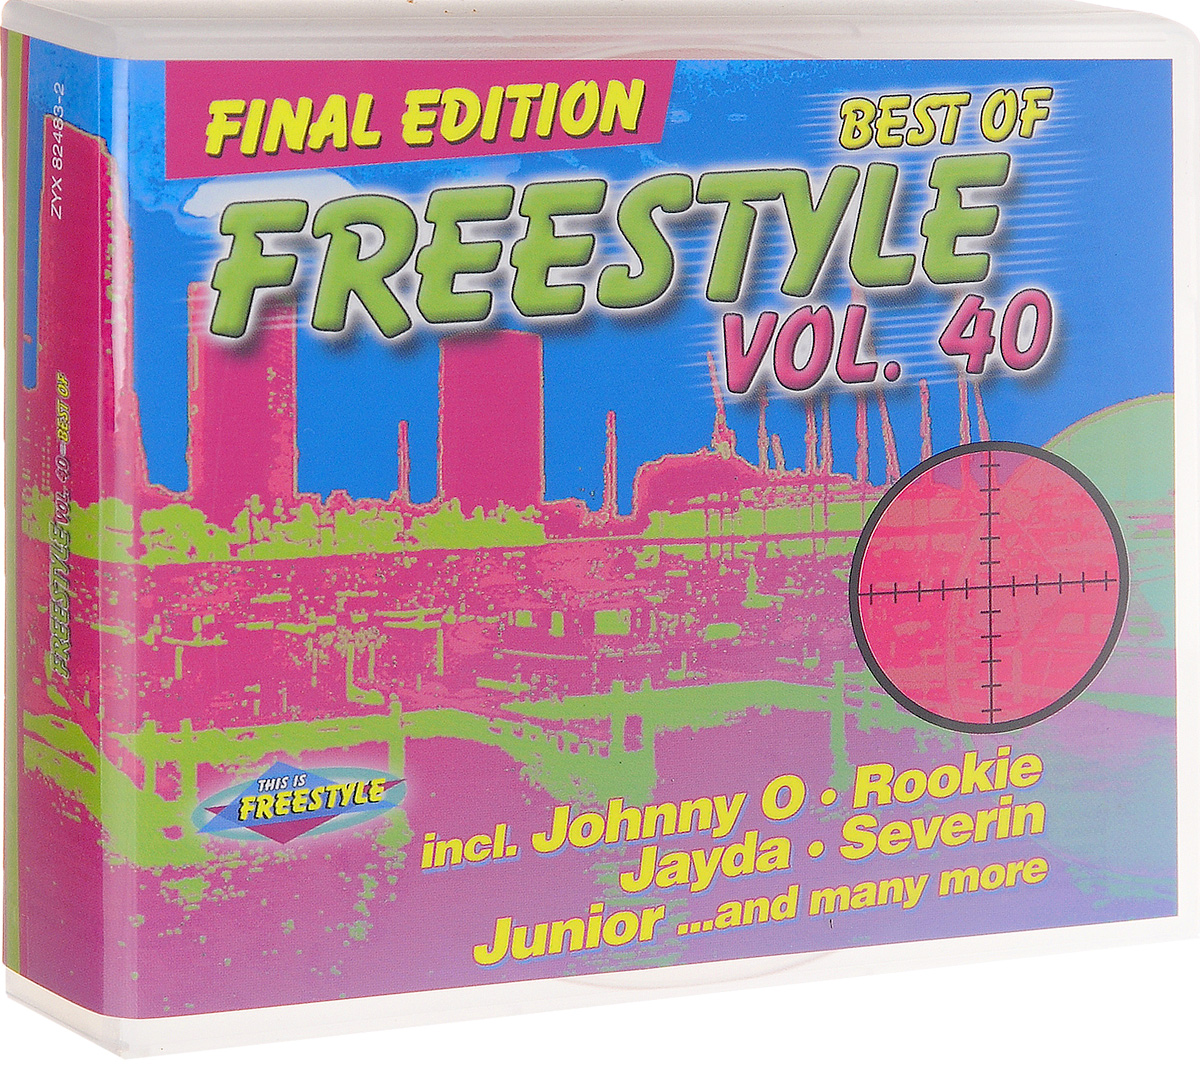 Freestyle. Vol. 40. Best Of! Final Edition (3 CD)